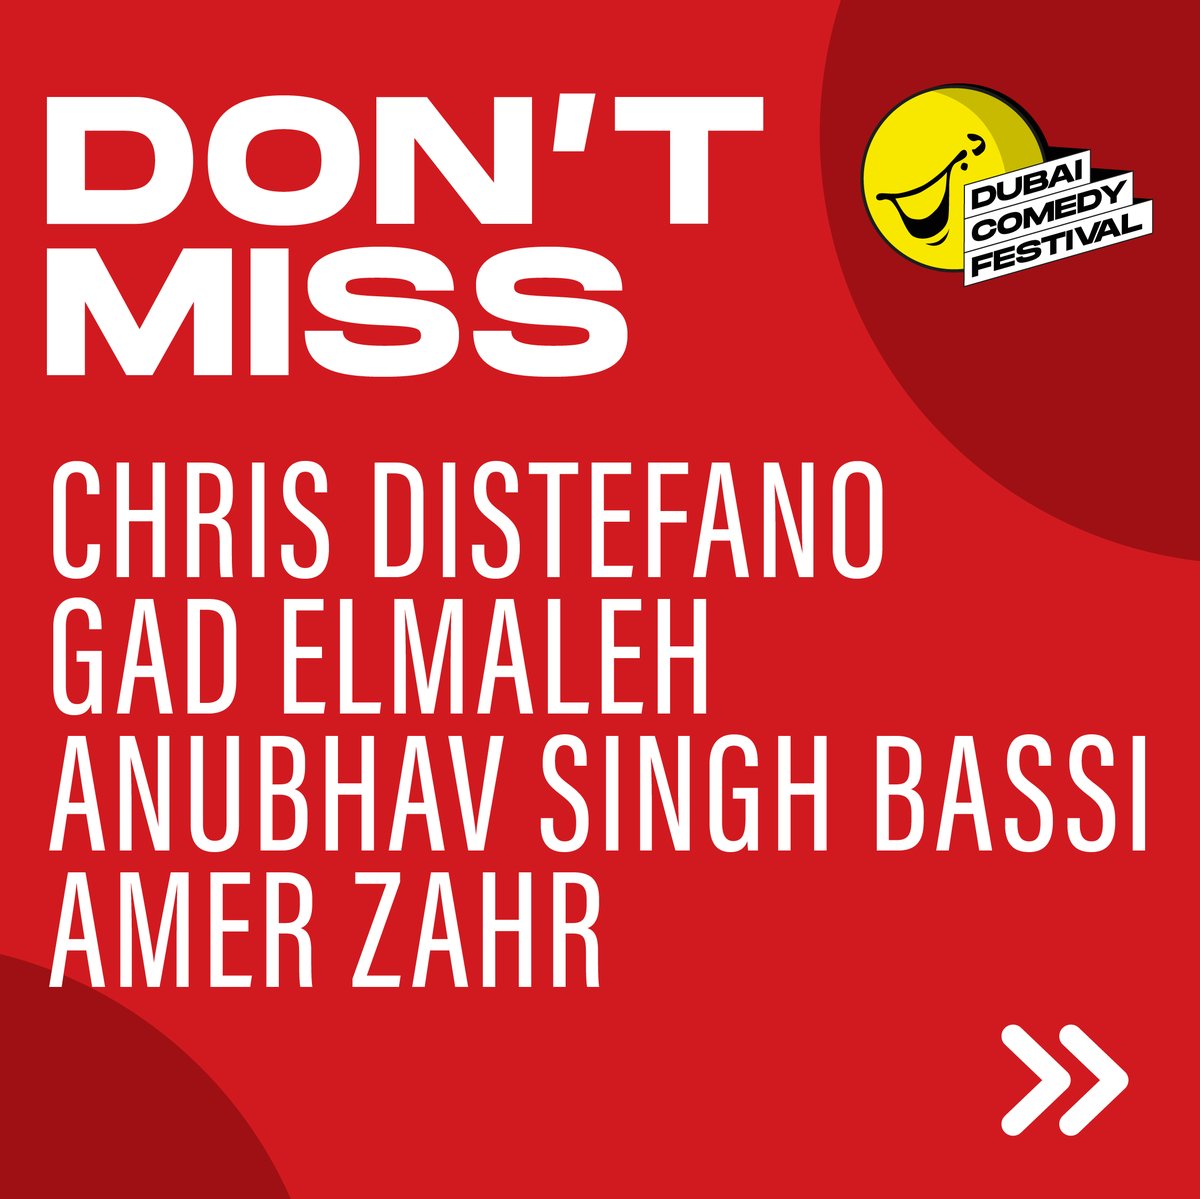 Get ready to LOL like never before! Chris Distefano, Gad Elmaleh, Anubhav Singh Bassi, and Amer Zahr are taking center stage with jaw dropping jokes and punchlines 👊

Get your tickets now on dubaicomedyfest.ae

#DubaiComedy #DCF2024